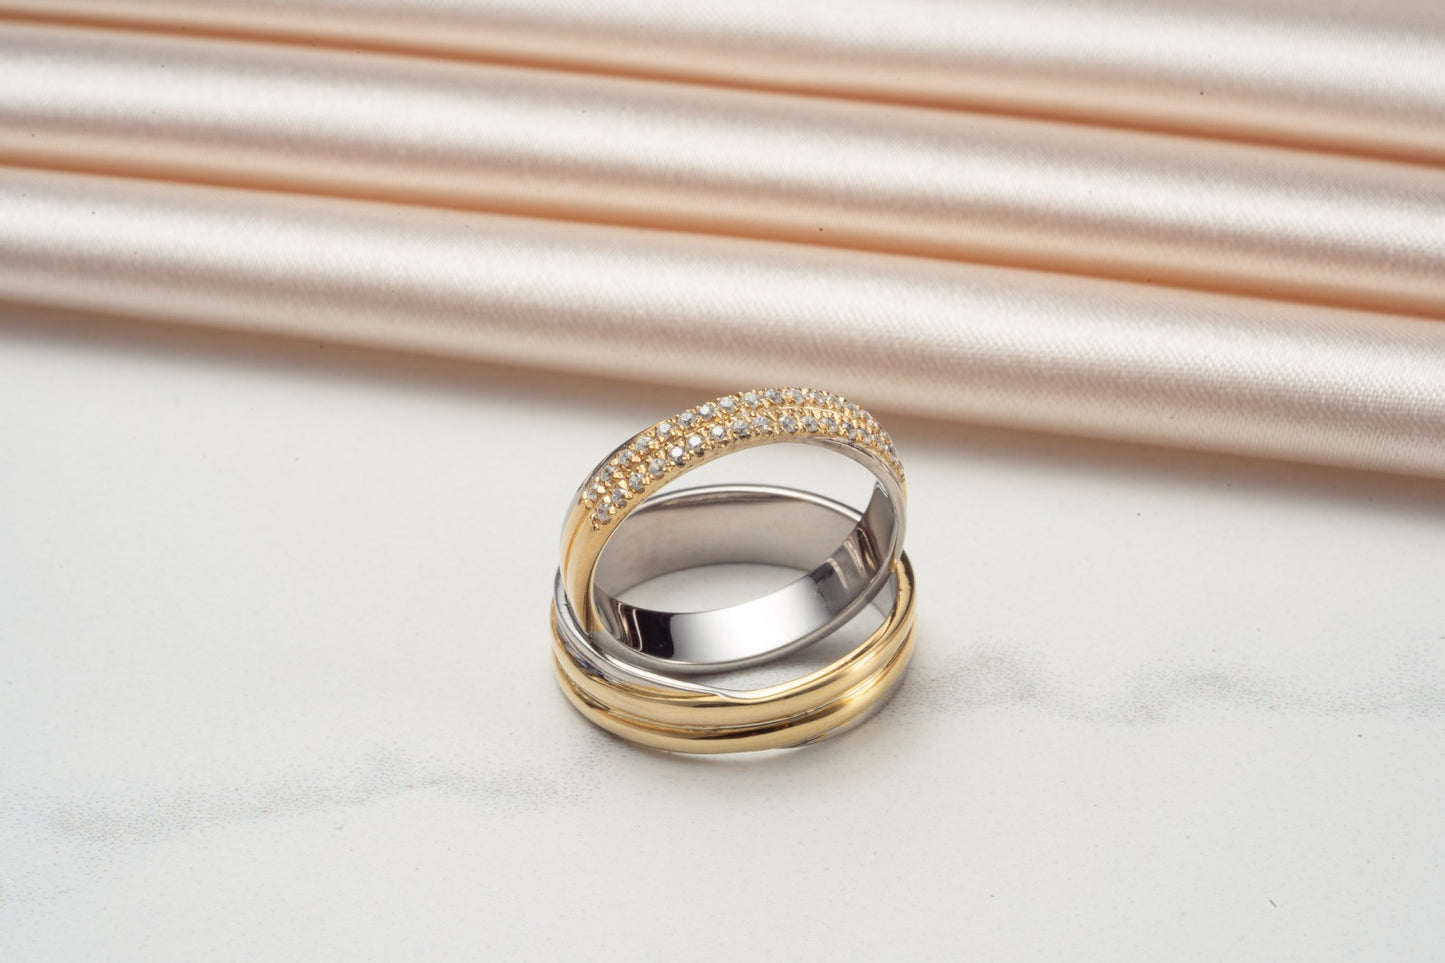 Les Alajeras - A recommended Wedding Ring Supplier